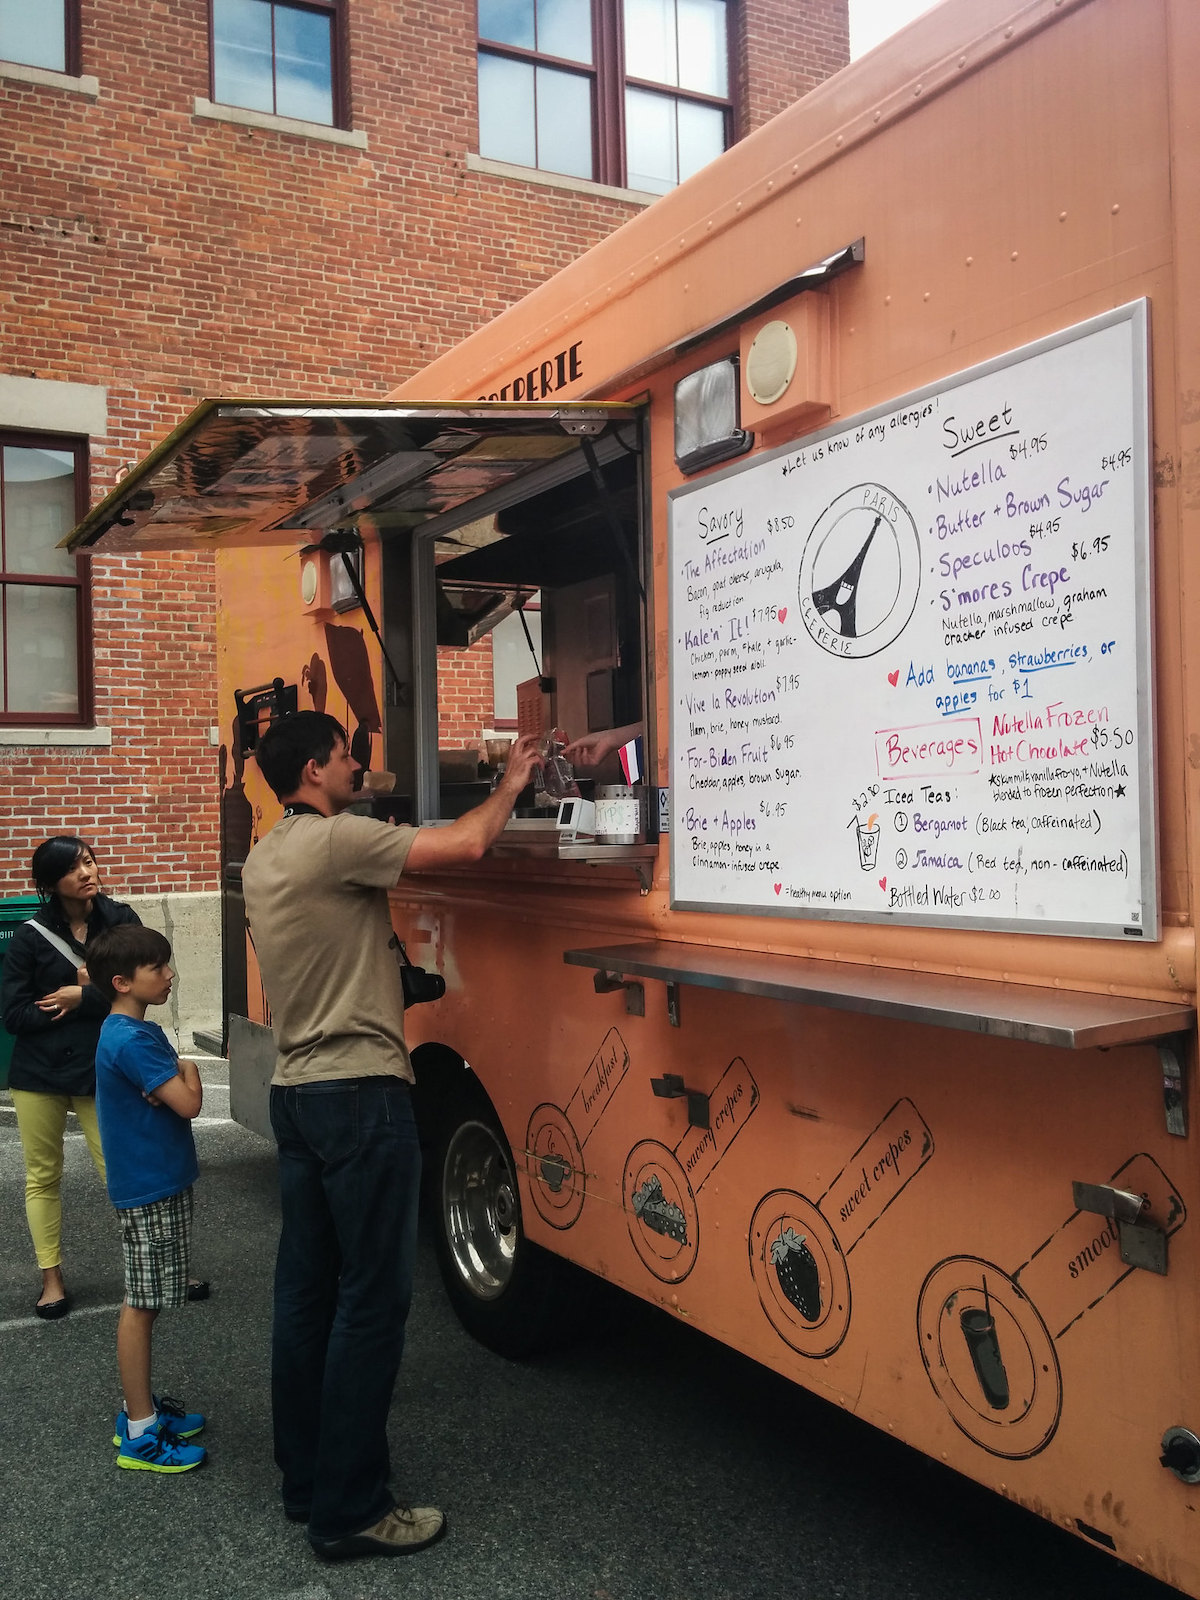 A man pays for his food through the window of an orange food truck